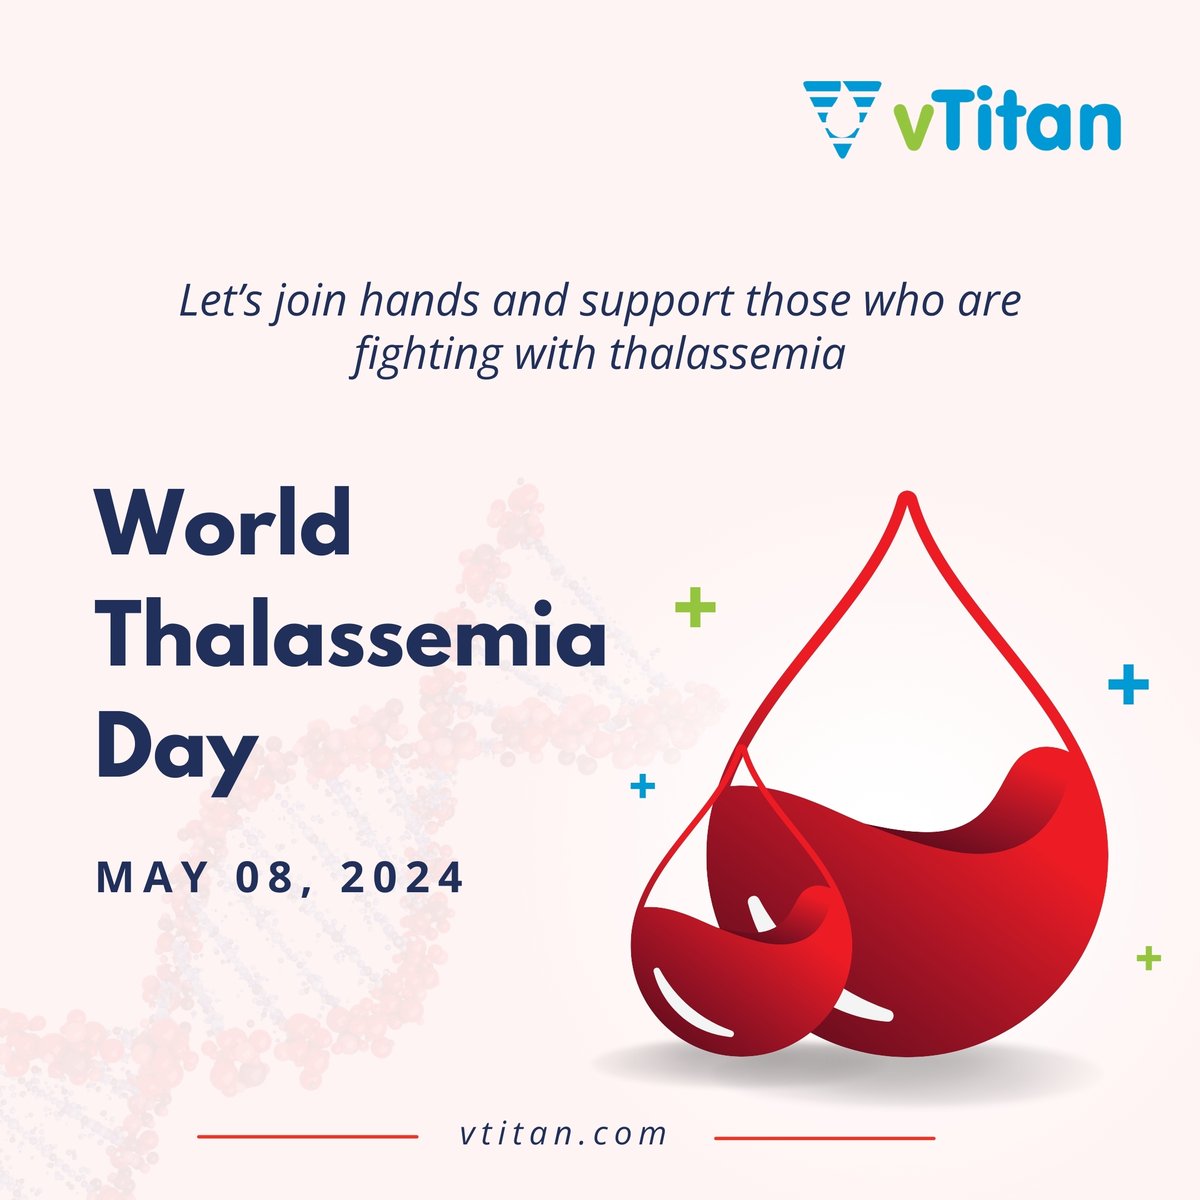 Thalassemia may be rare, but its impact is profound.

On #WorldThalassemiaDay, let's spread awareness about this genetic blood disorder, stand with thalassemia patients, advocate for accessible treatment, and promote blood donations.

#vTitan #RareBloodDisorder #Thalassemia